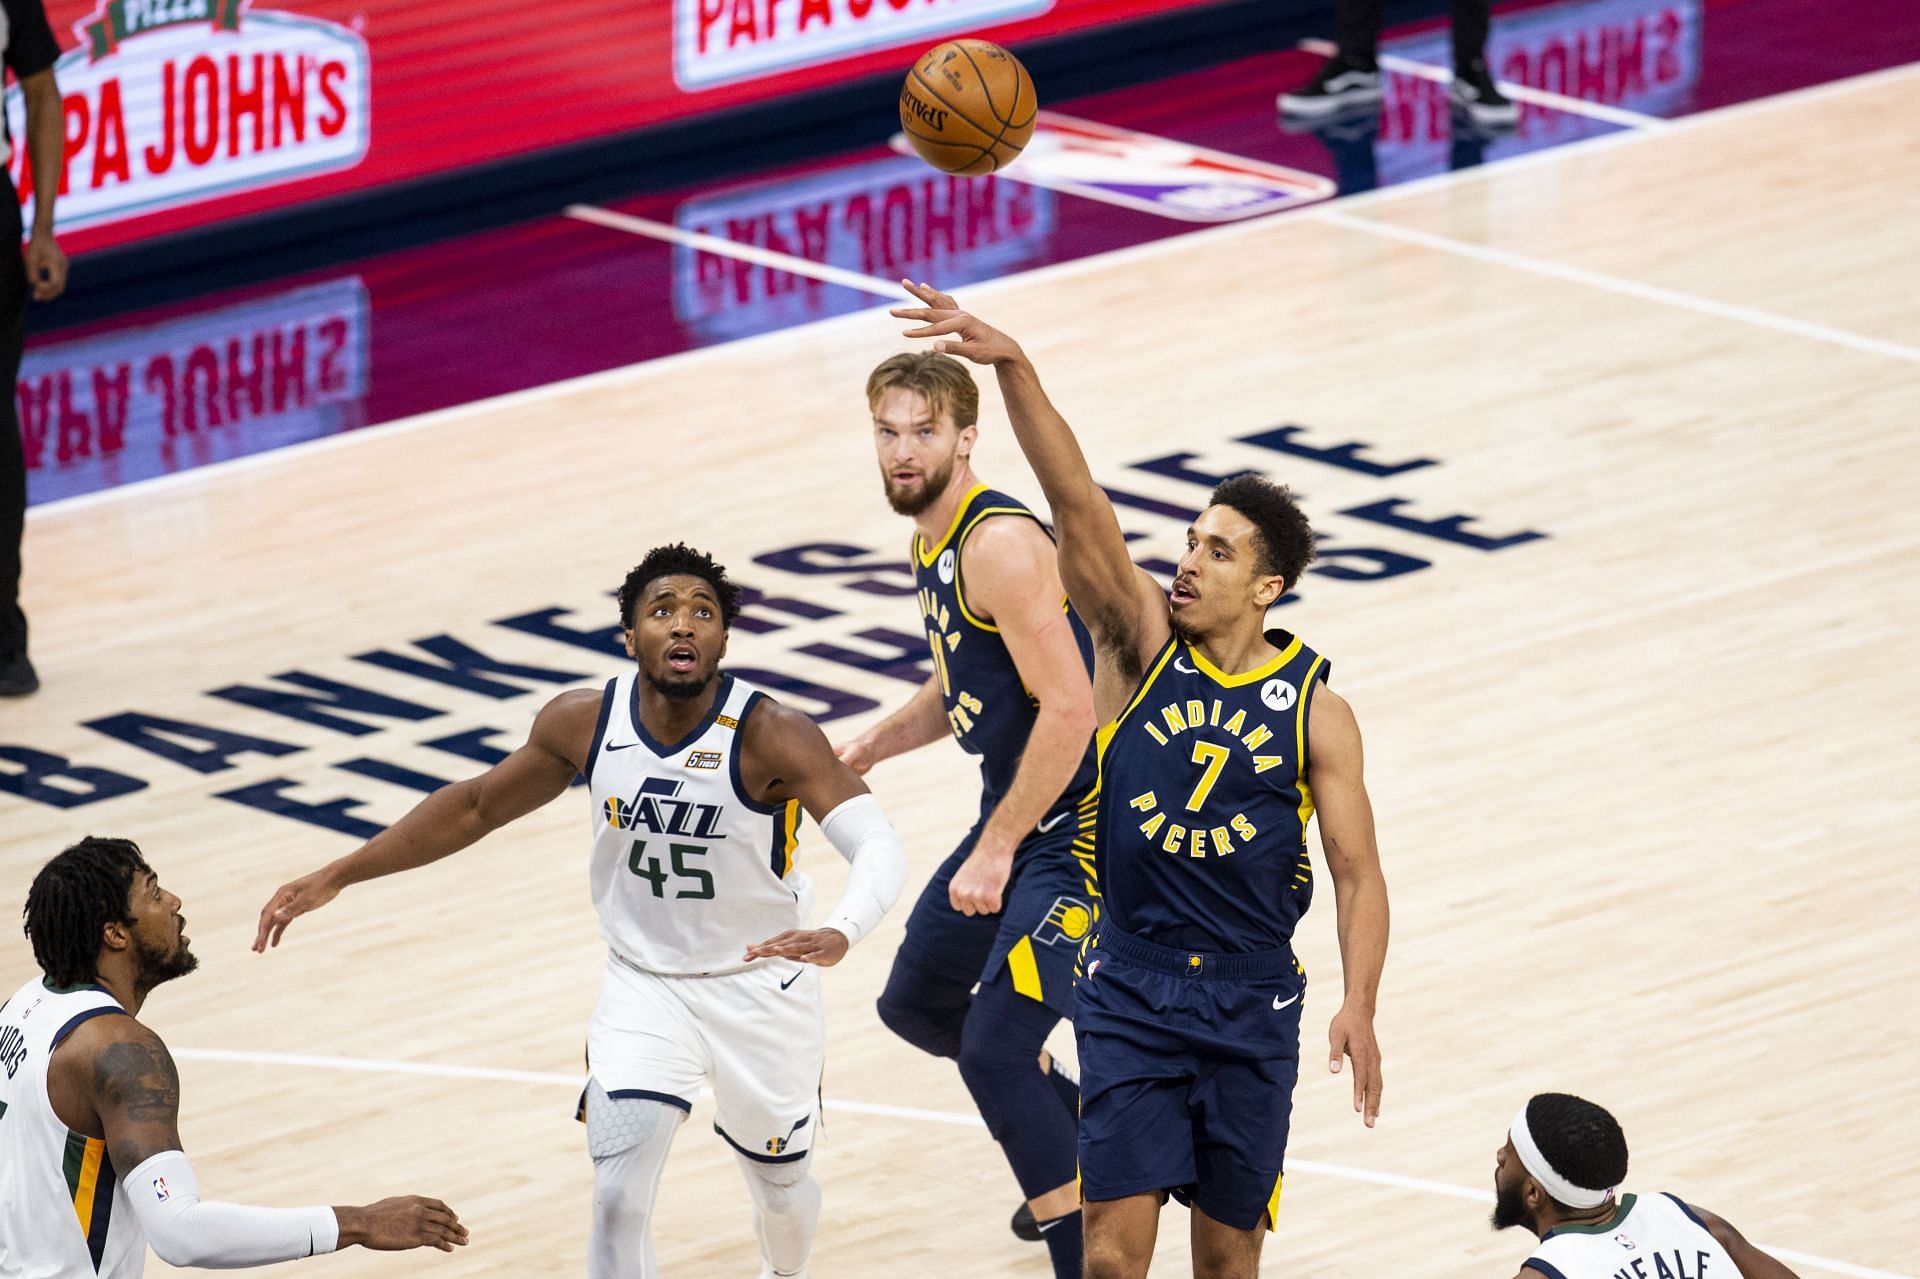 Utah Jazz will face off against the Indiana Pacers at the Vivint Arena on Thursday